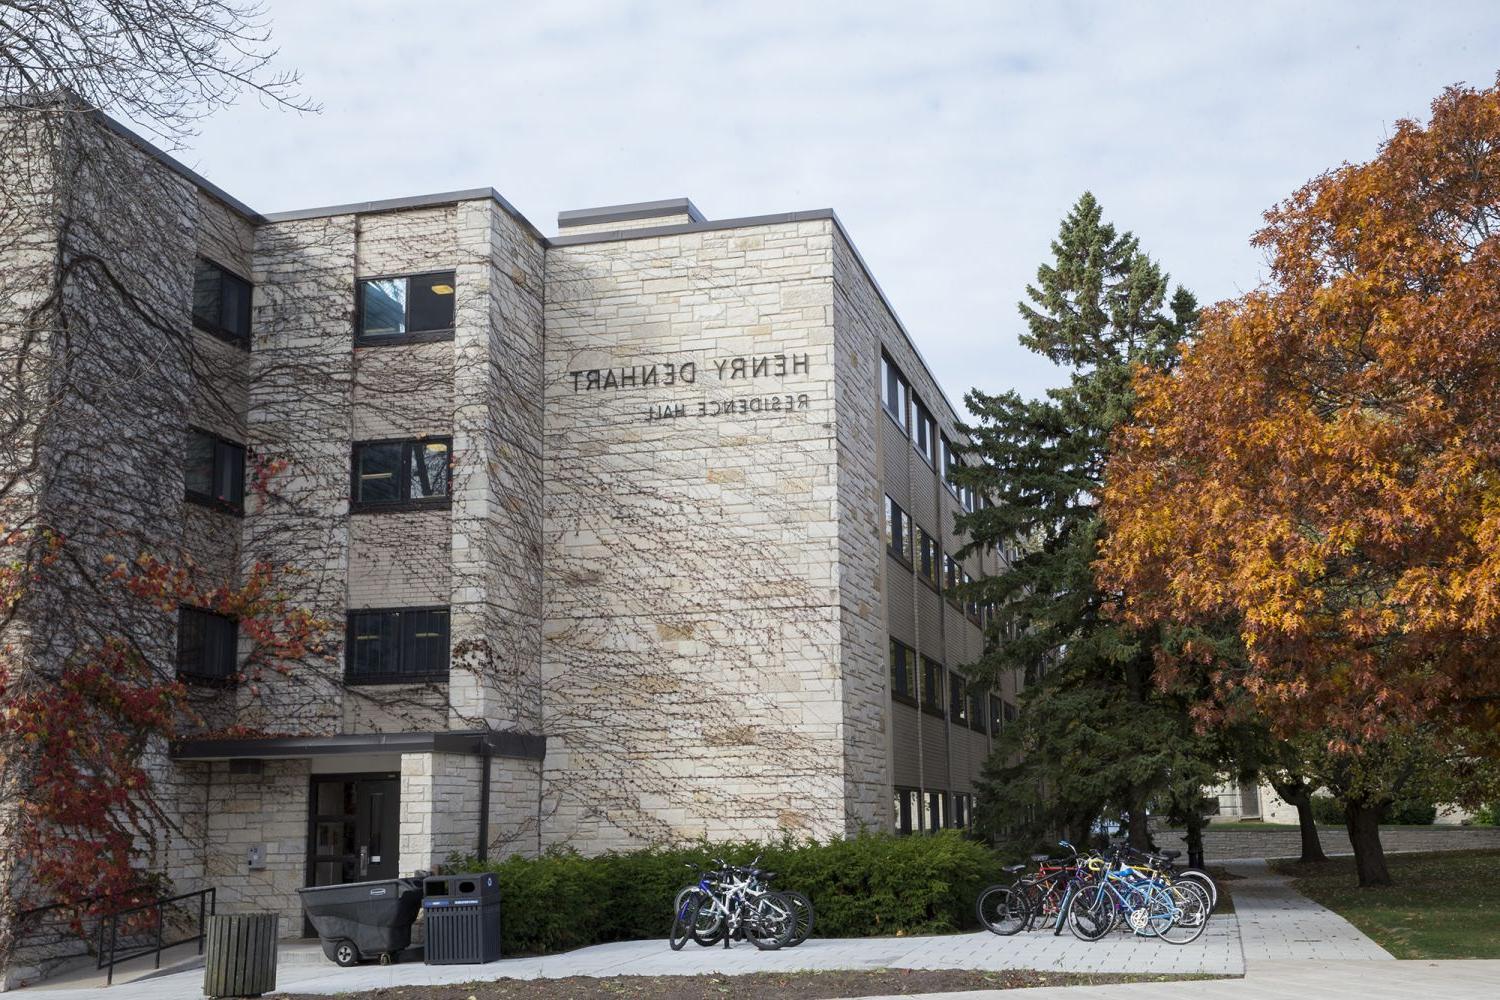 Henry Denhart Residence Hall is a traditional, co-ed hall that is named for Henry Denhart, an ear...